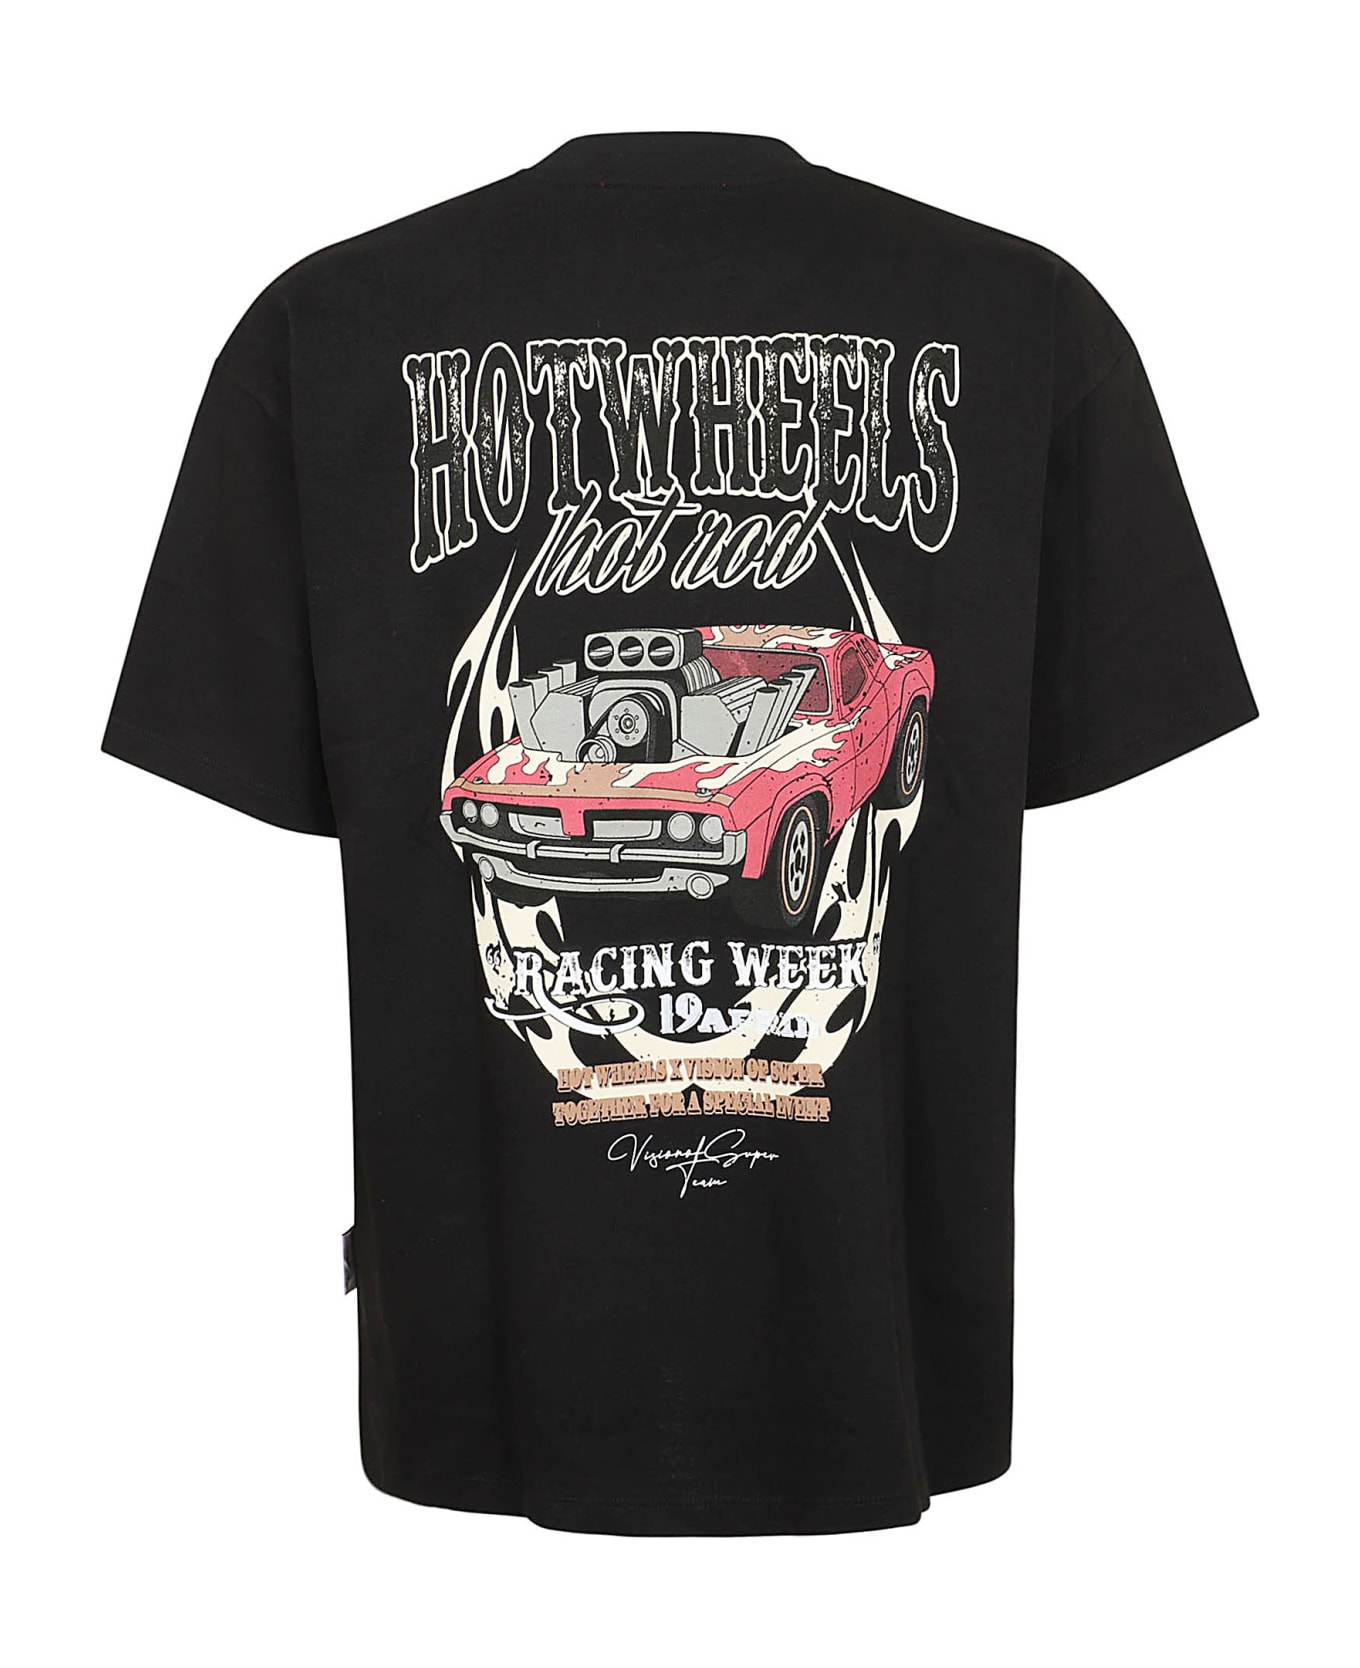 Vision of Super Black T-shirt With Red Car Print - Black シャツ